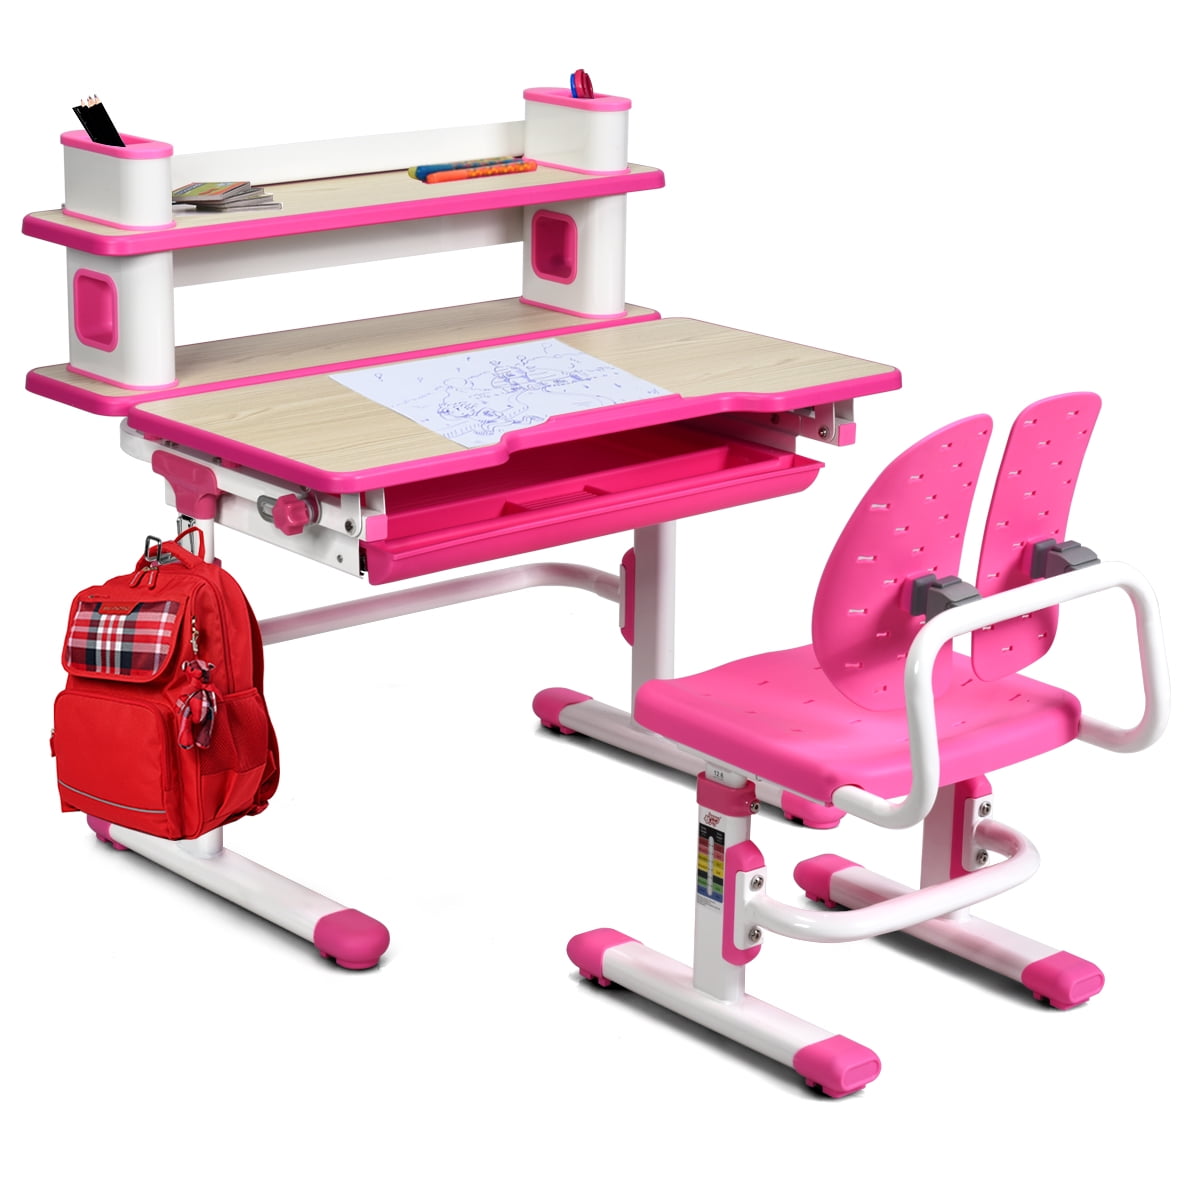 Playtime by Eimmie Classroom Playset w/ Desk & Chair for 18 Inch 